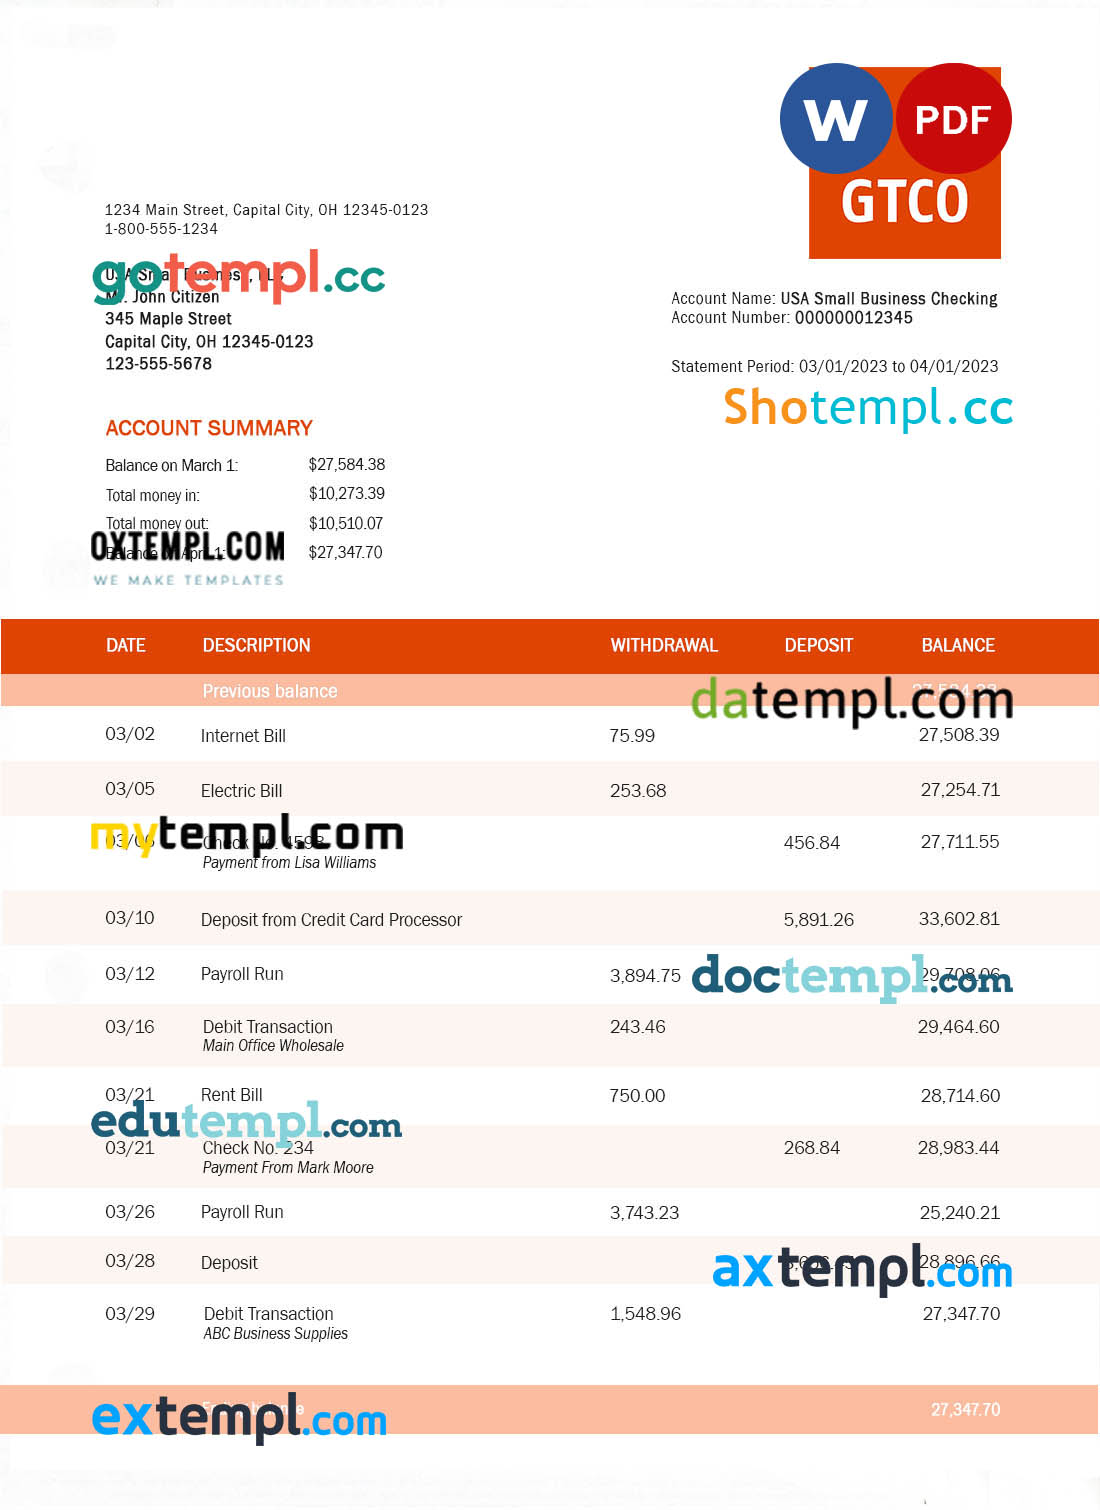 Gt Bank organization checking account statement Word and PDF template